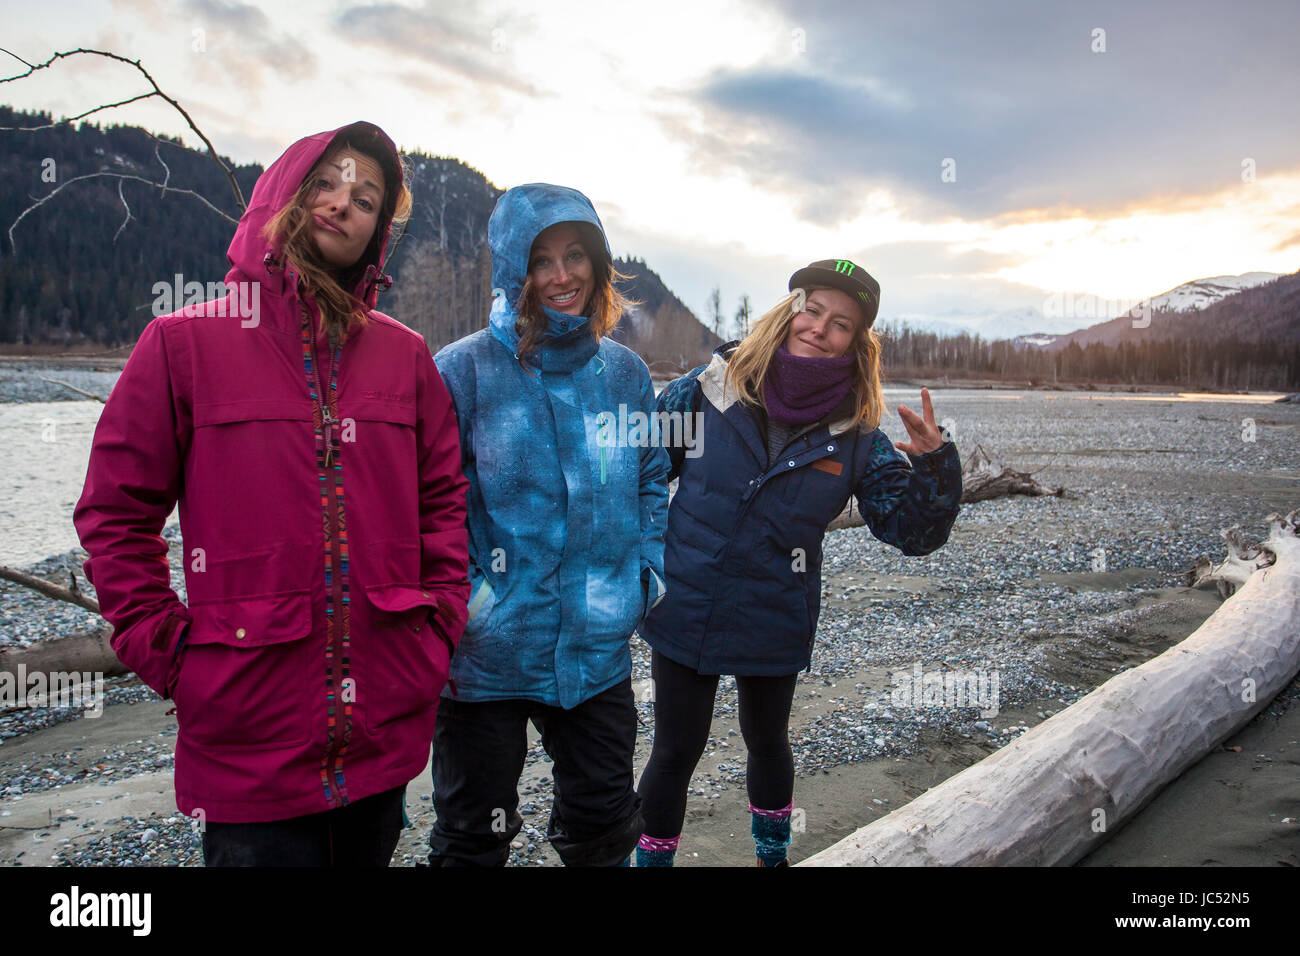 Professional snowboarders Robin Van Gyn, Helen Schettini, and Jamie Anderson, hang out on the side of a river after a day of snowboarding in Haines, Alaska. Stock Photo